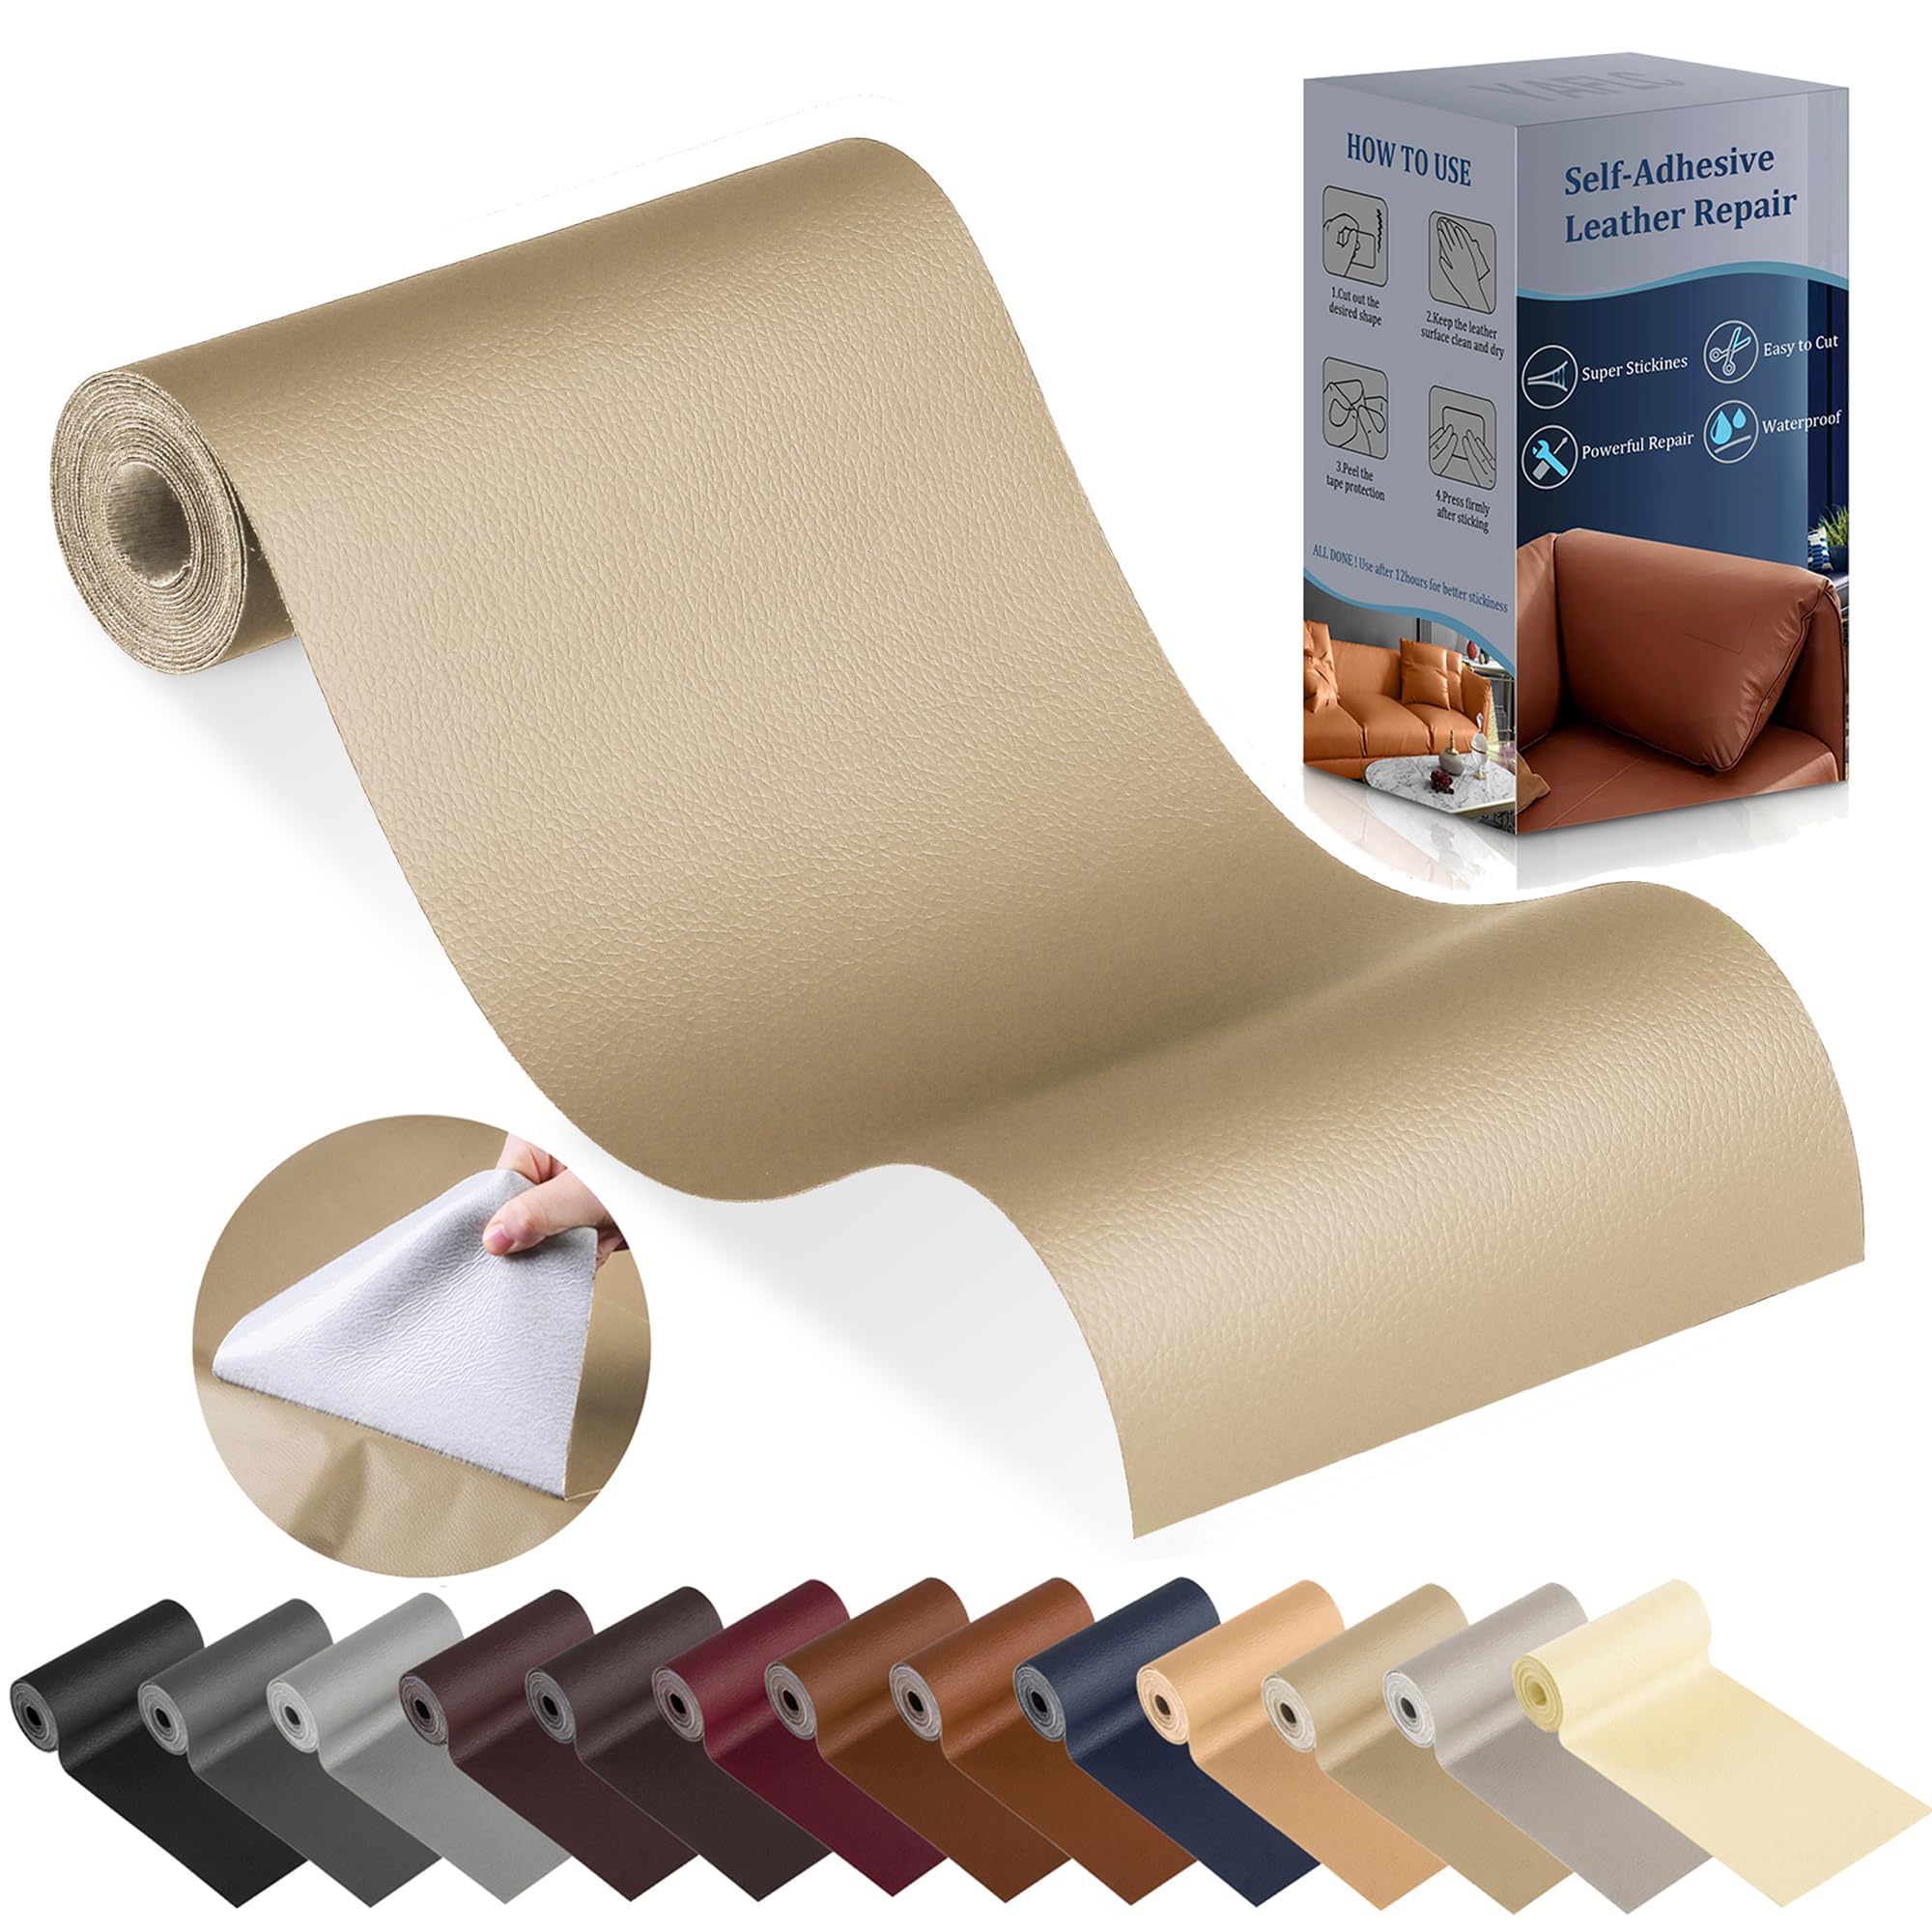 WANGYUXIN Leather Repair Kits for Couches,Self Adhesive Leather Patch  Cuttable Sofa Repairing, Leather Repair Tape for Car Seat, Faux Leather  Couch Repair Kit,Beige,200x138cm/78.7x54.3in